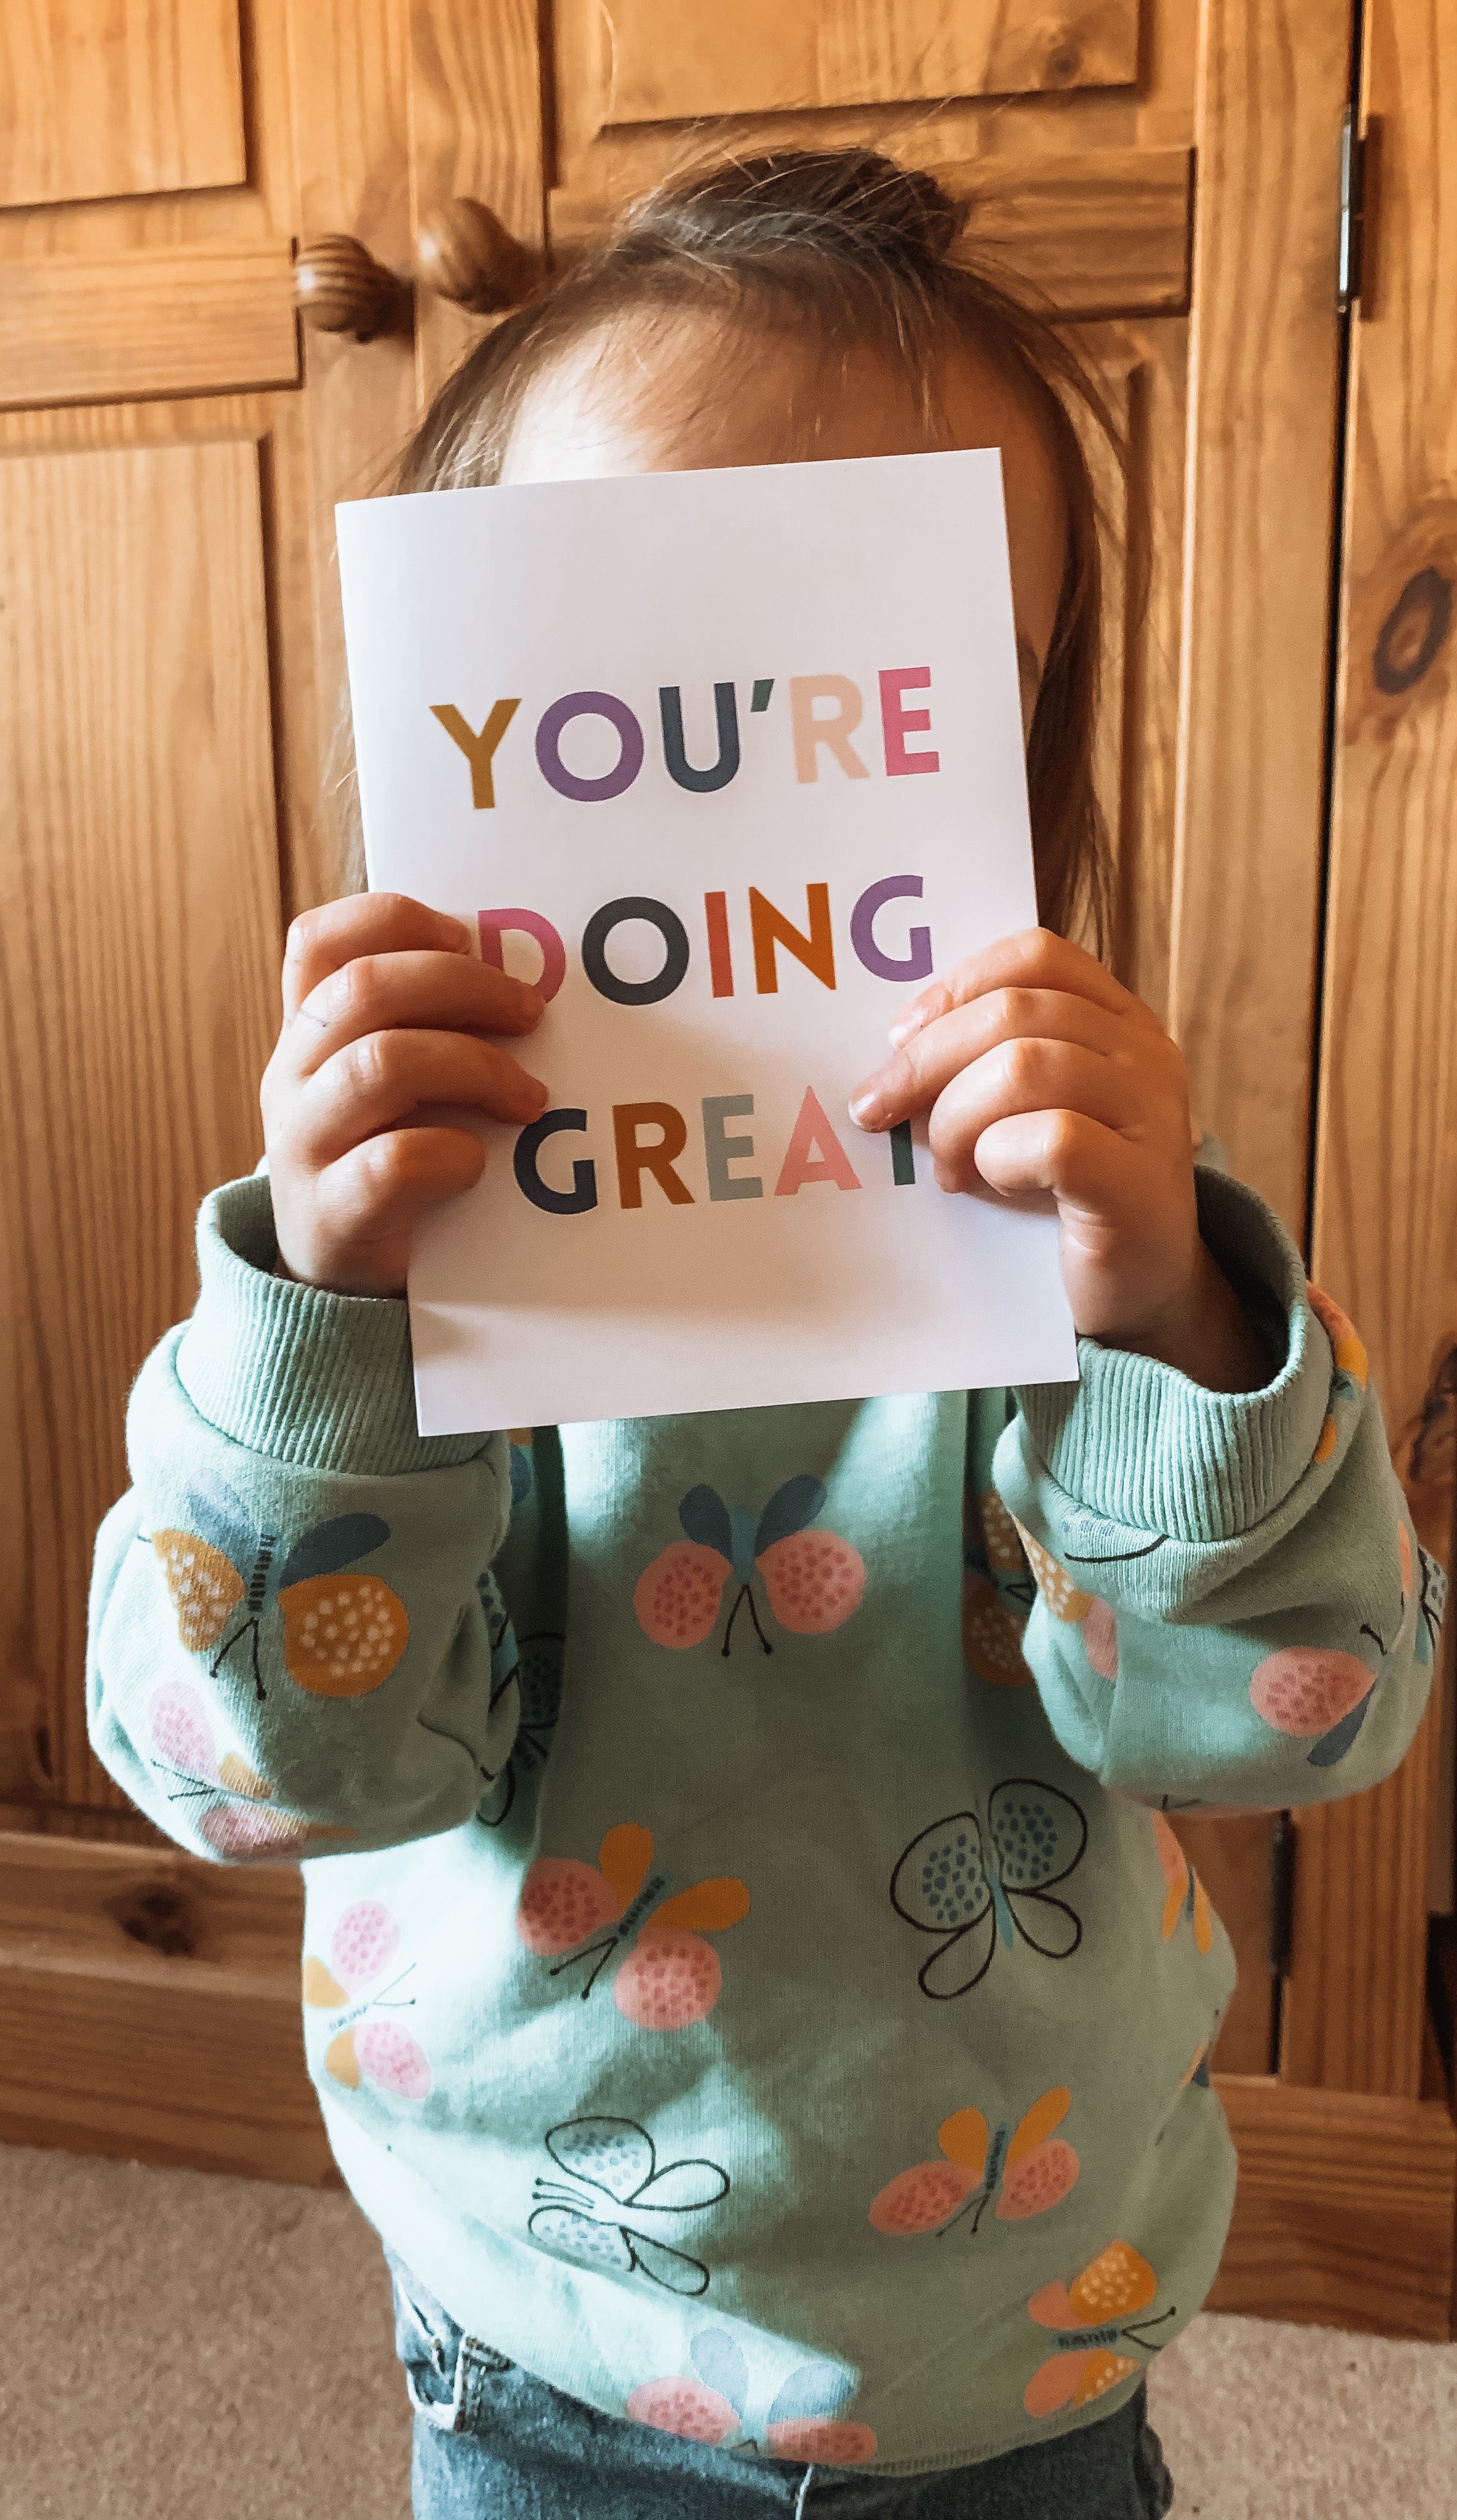 You’re doing great A6 card blank inside